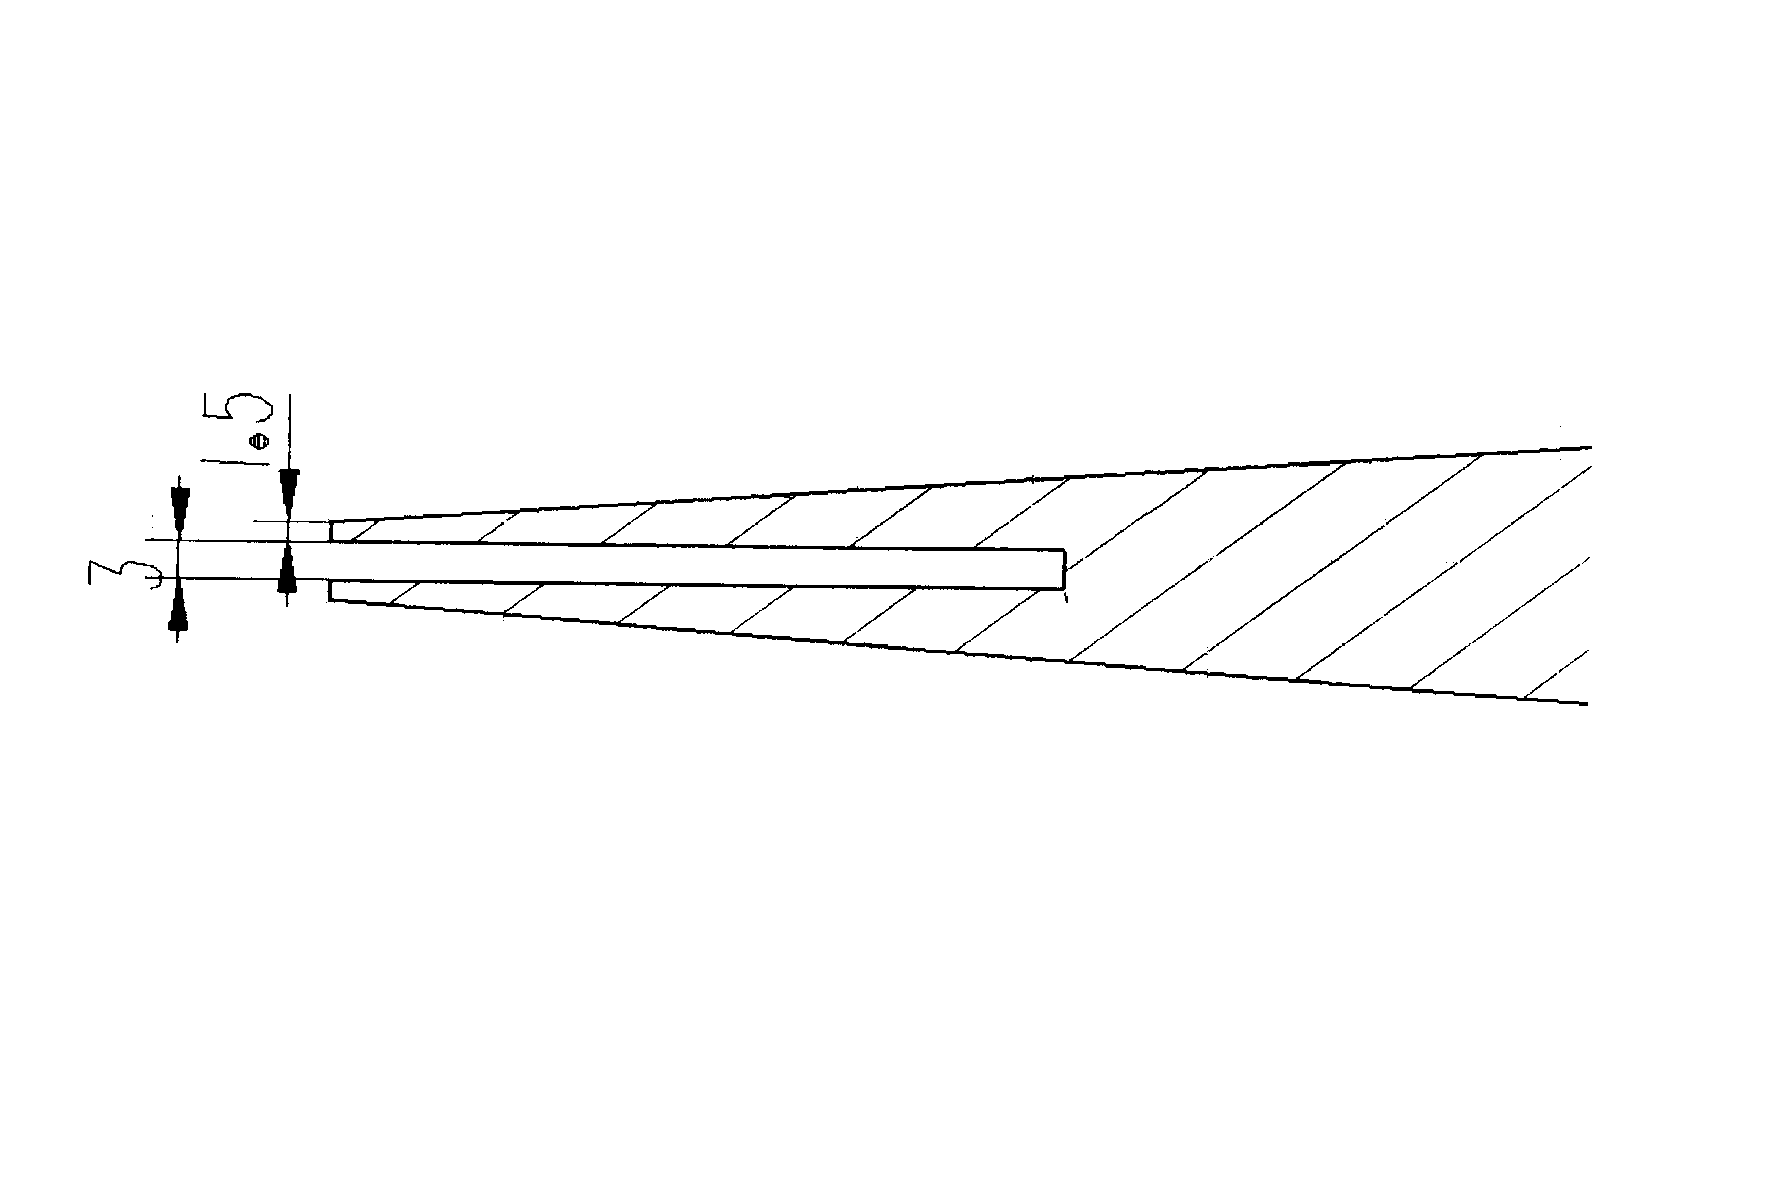 Numerical control machining method for thin narrow notch with thin edge